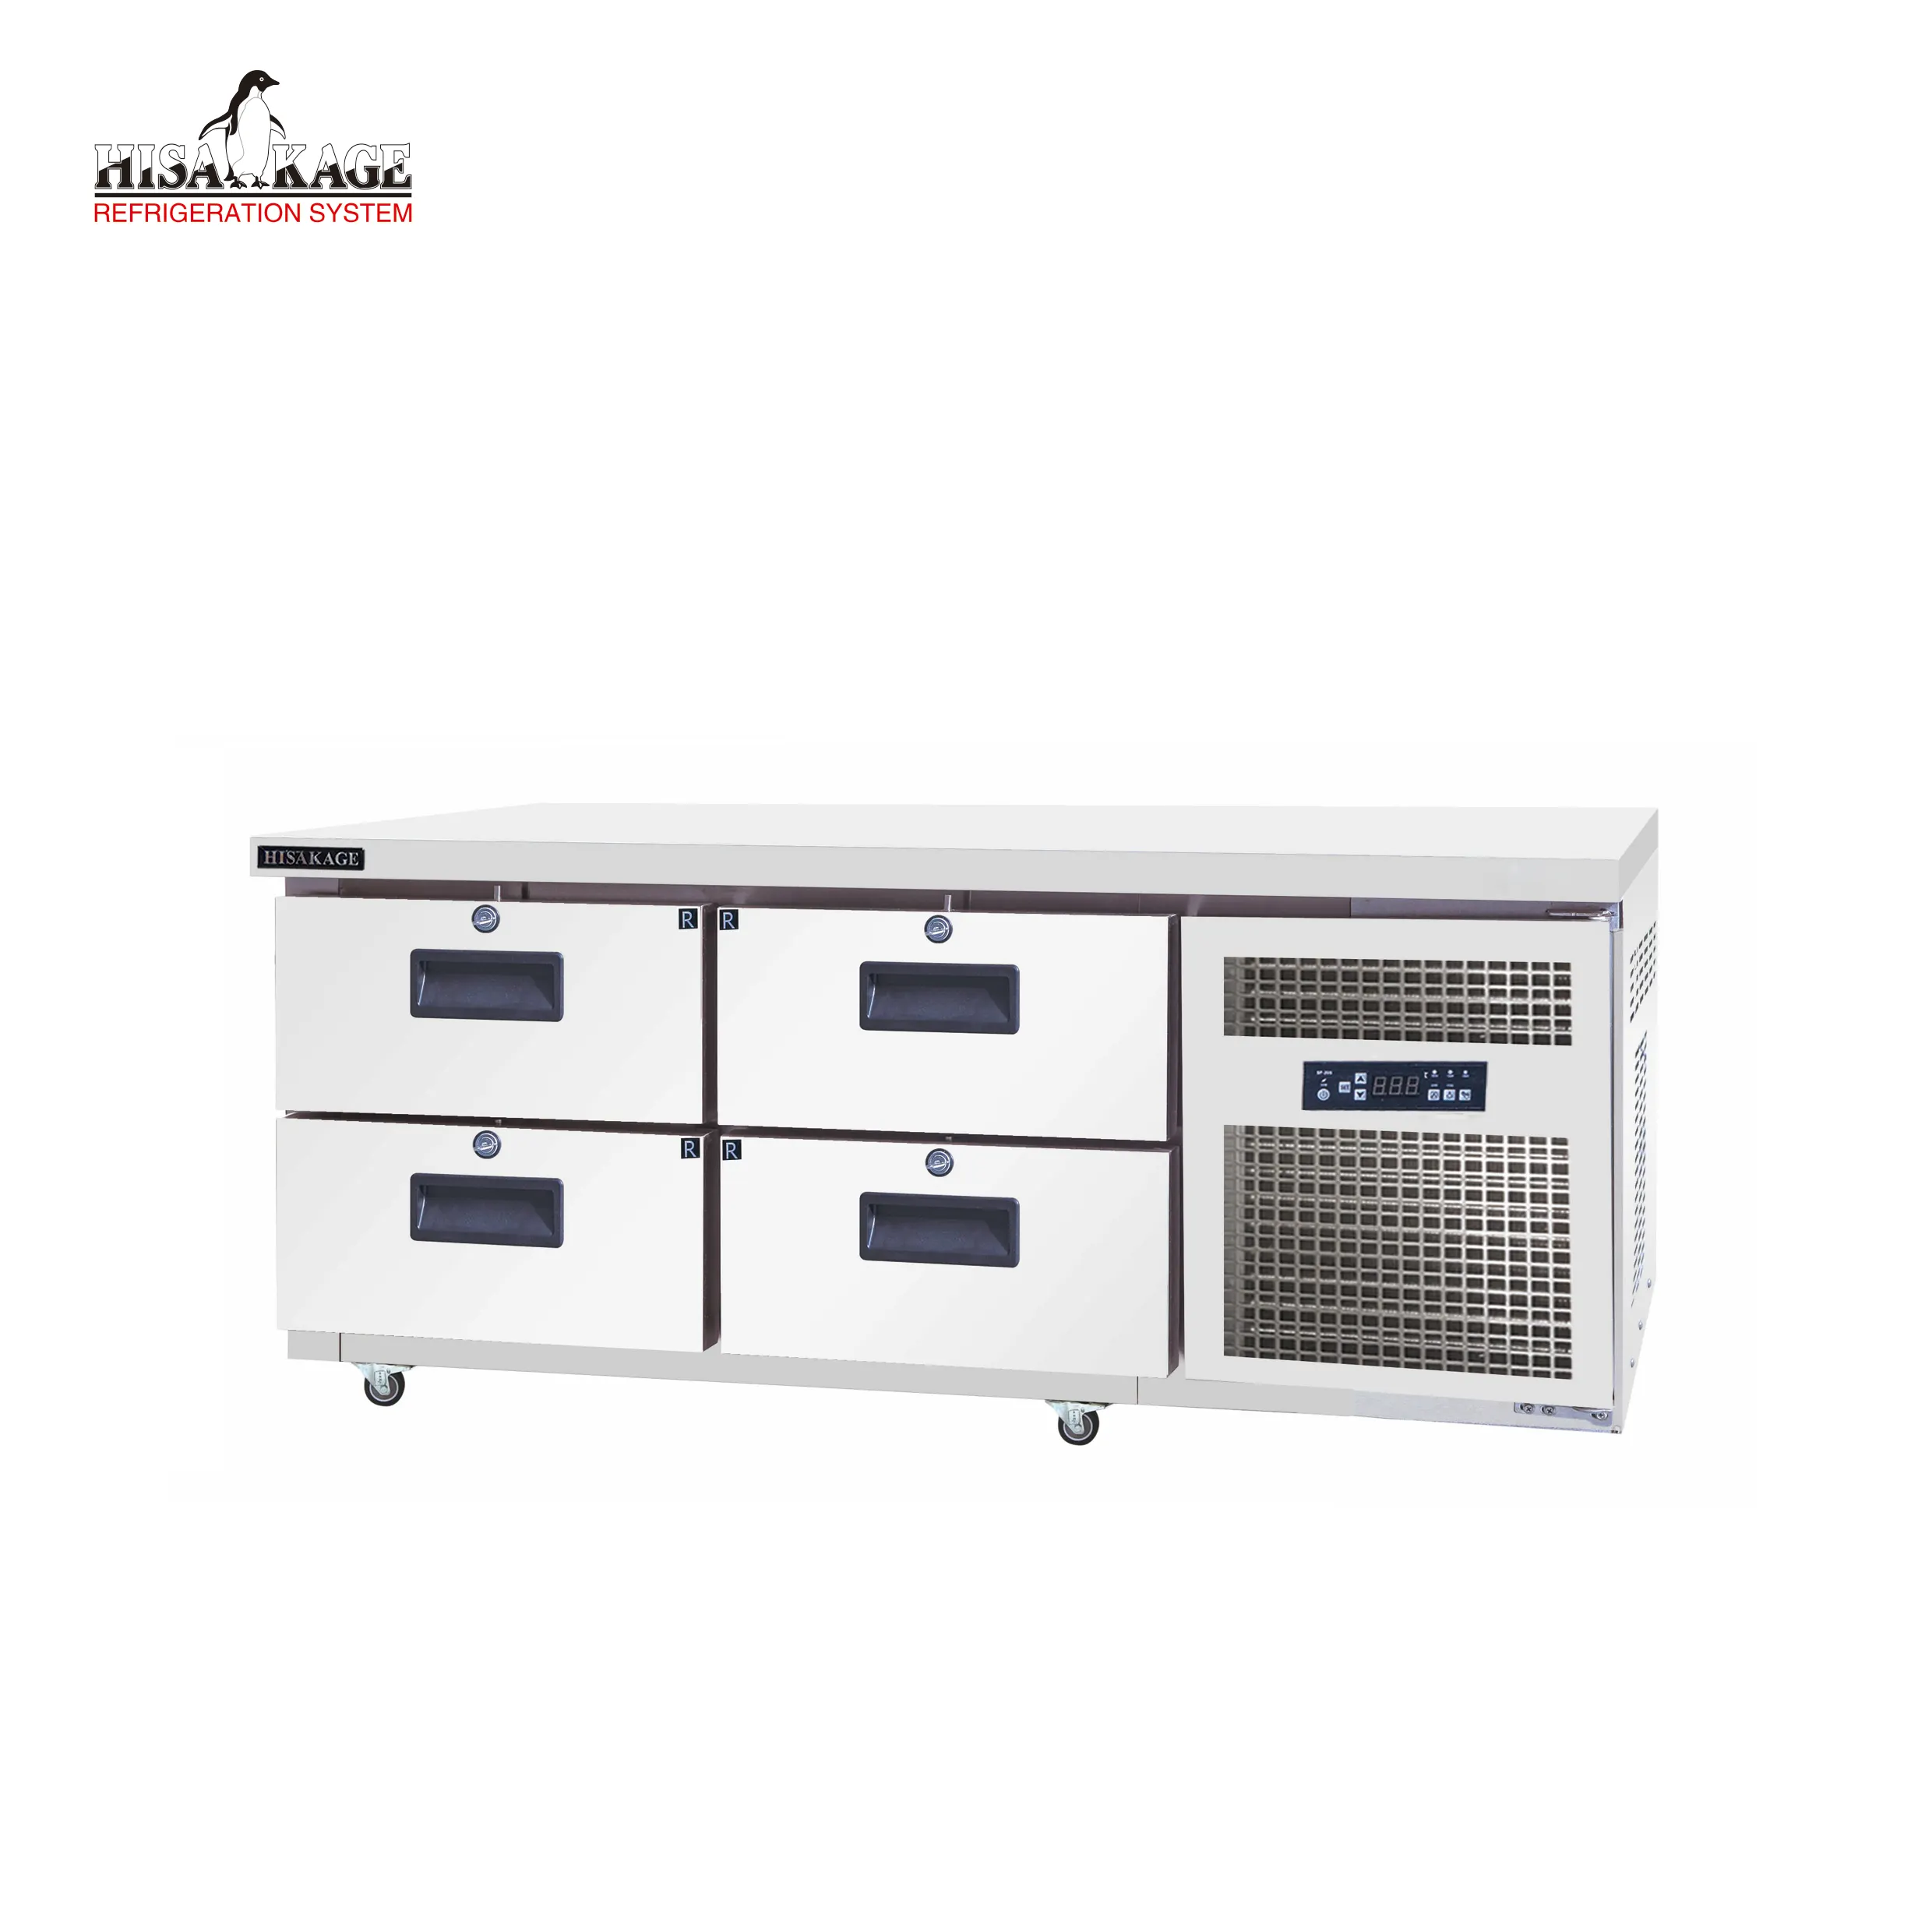 304 Air cooling under broiler stovetop refrigerator can place oven on commerical refrigerator for kitchen CL-150